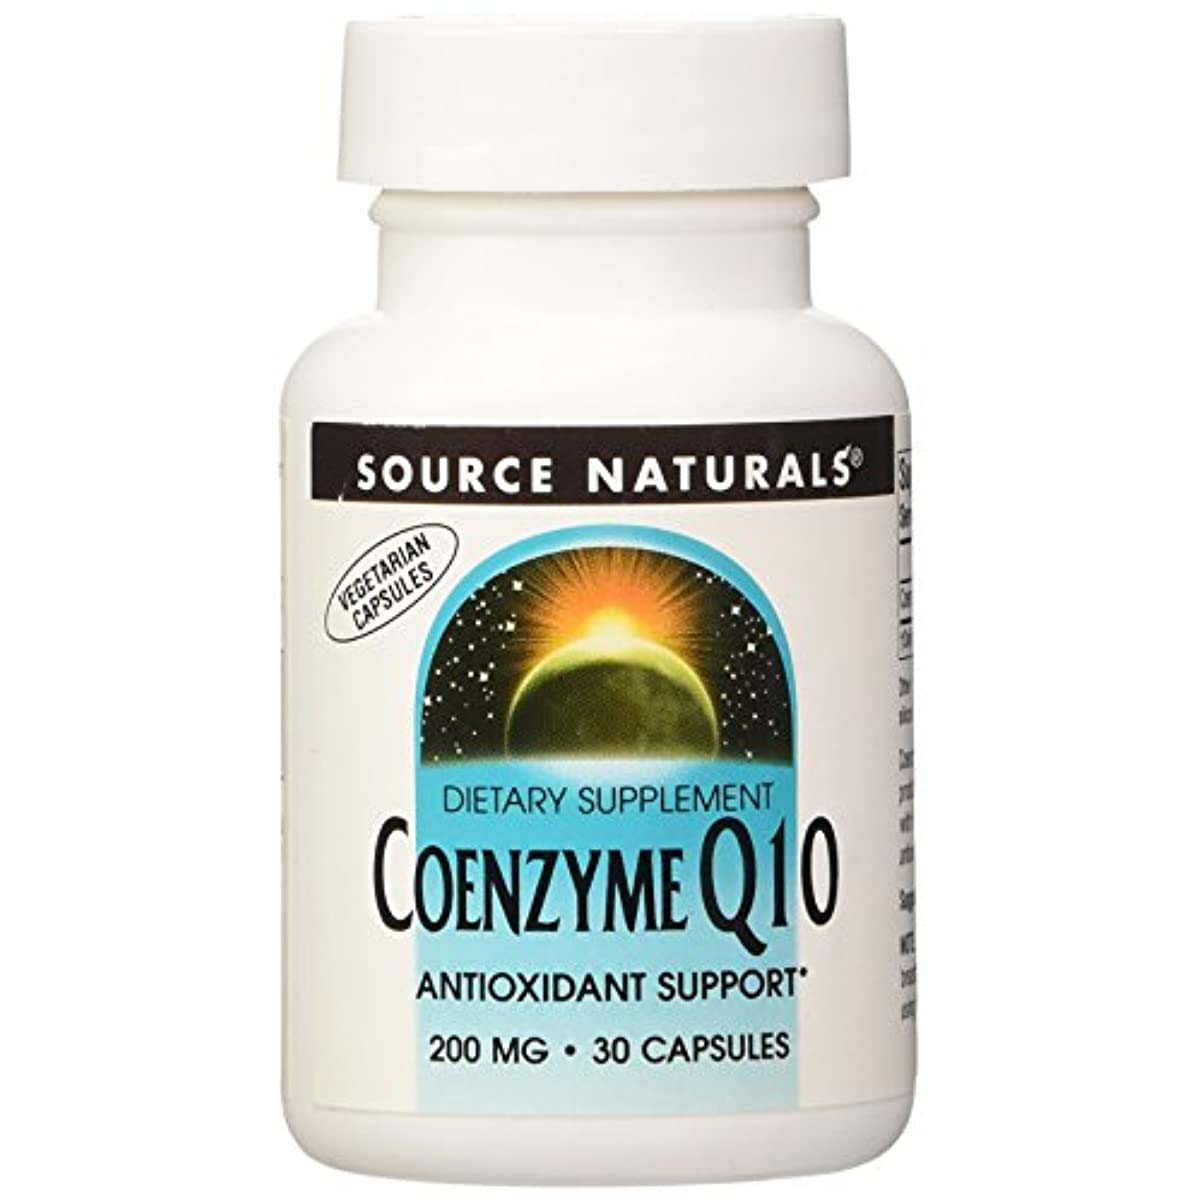 Source Naturals Coenzyme Q10 30 Capsules 200 mg